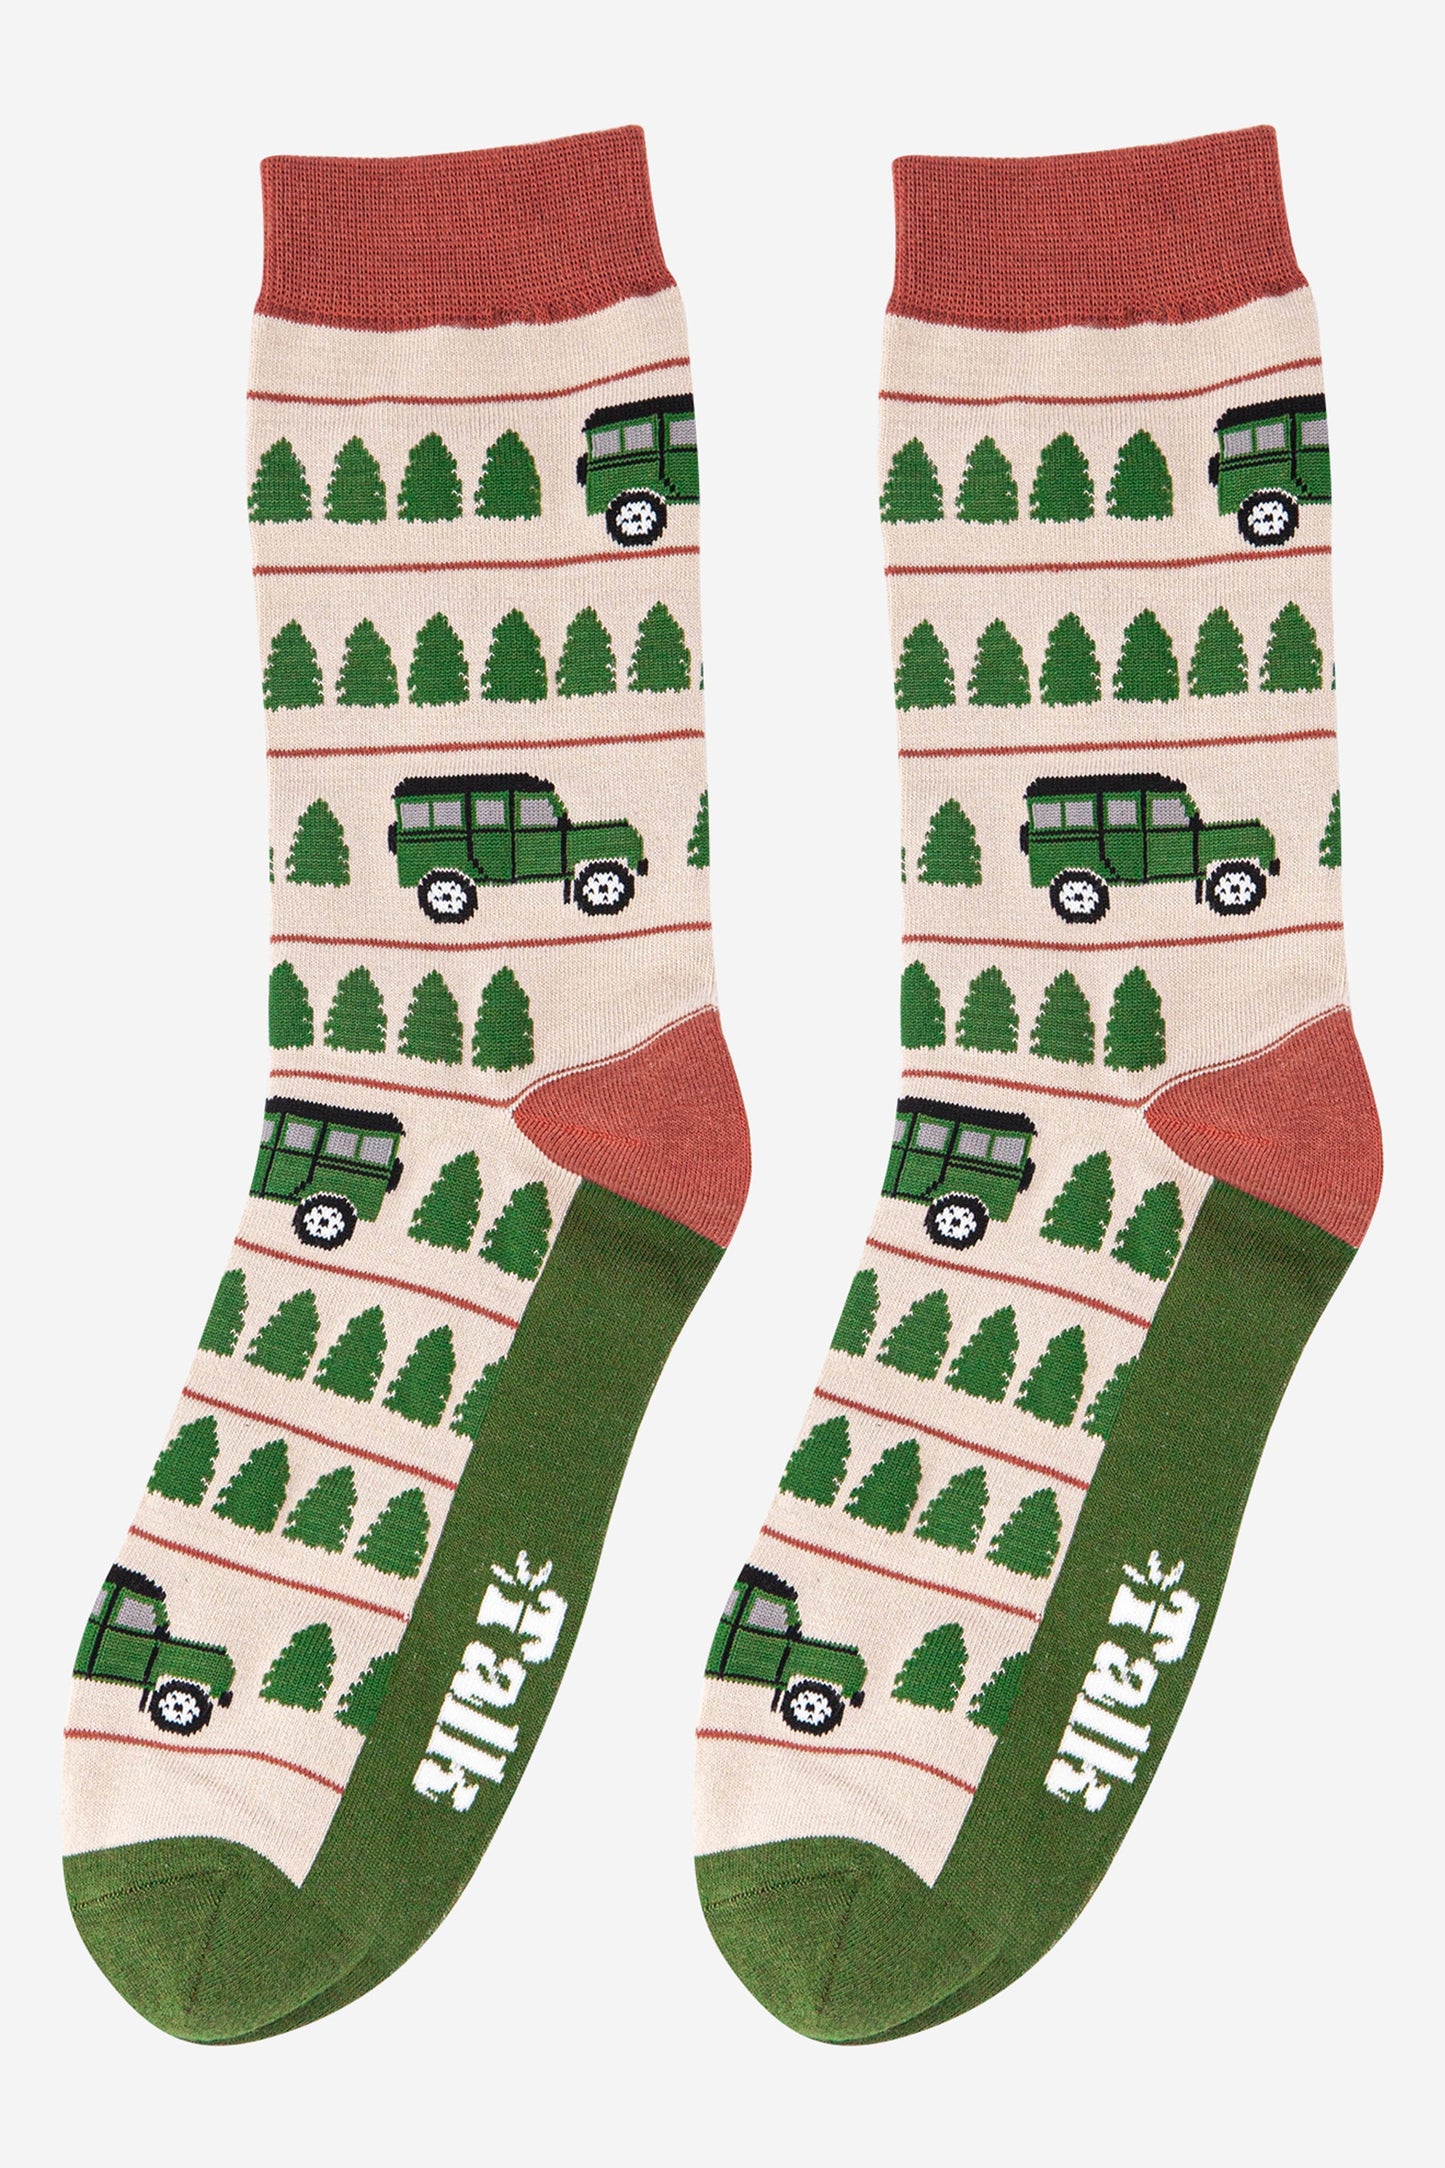 cream, green and orange socks with a pattern of trees and off road vehicles 